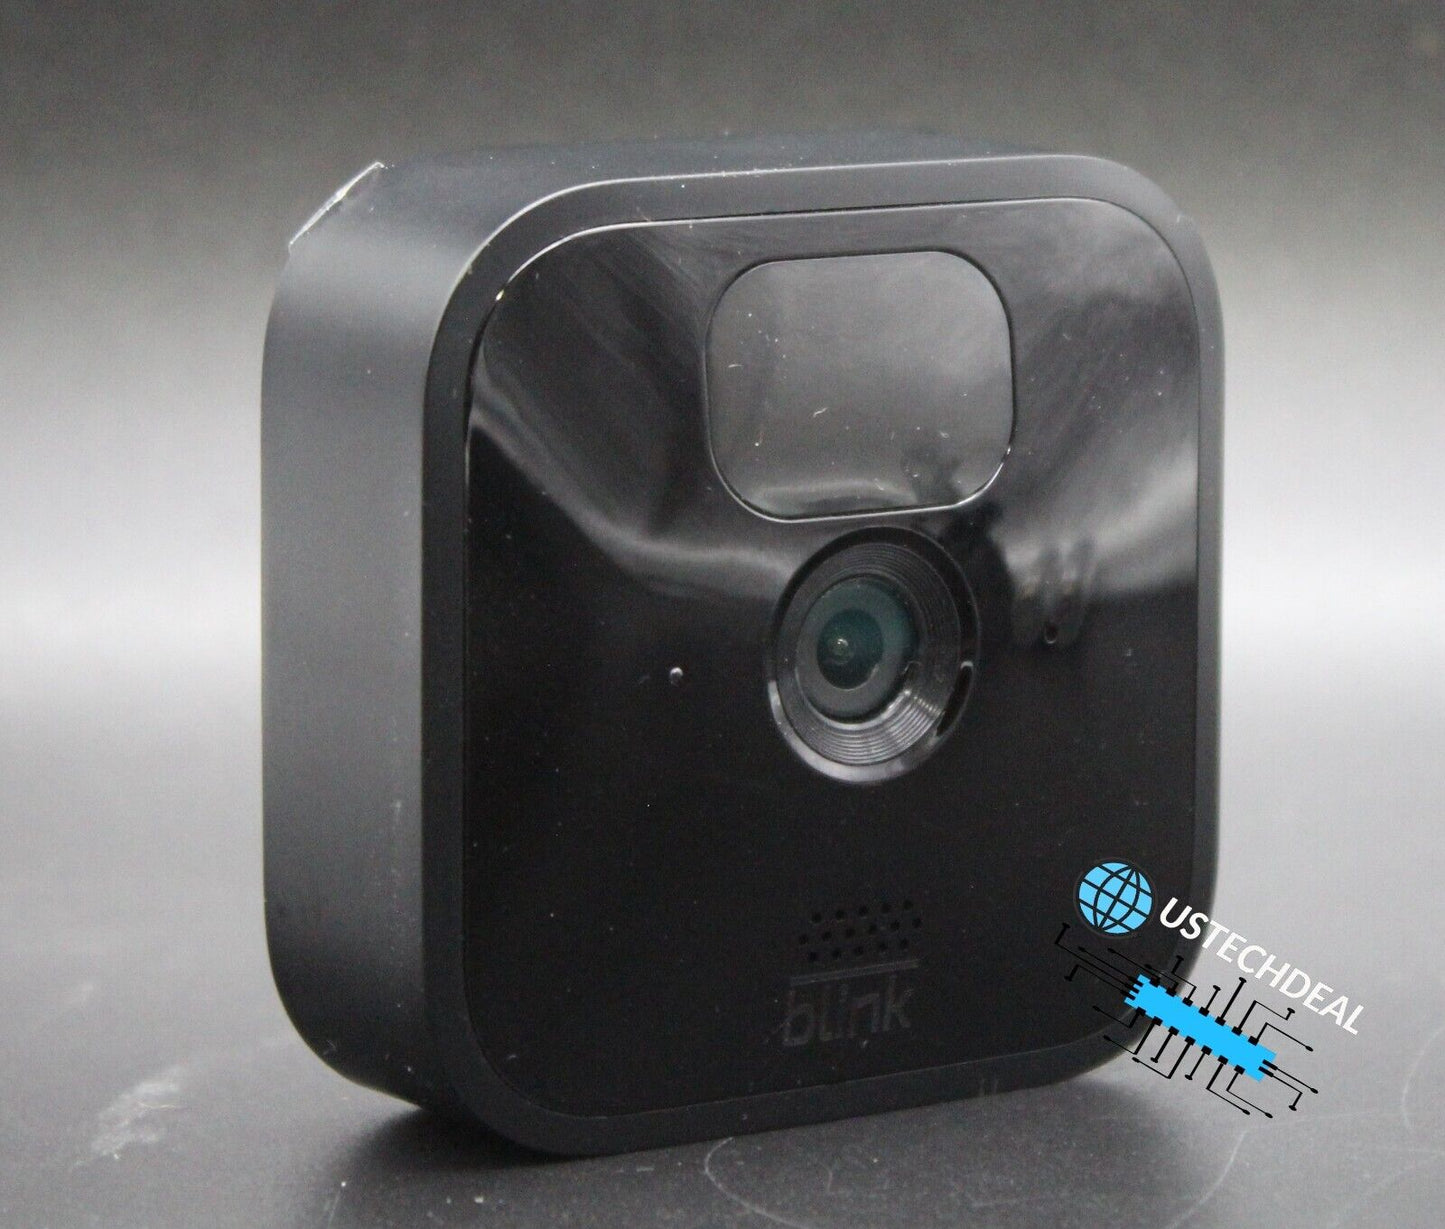 Blink Outdoor (3rd Generation) Add-On Security Camera (Sync Module required)  @USED condition@